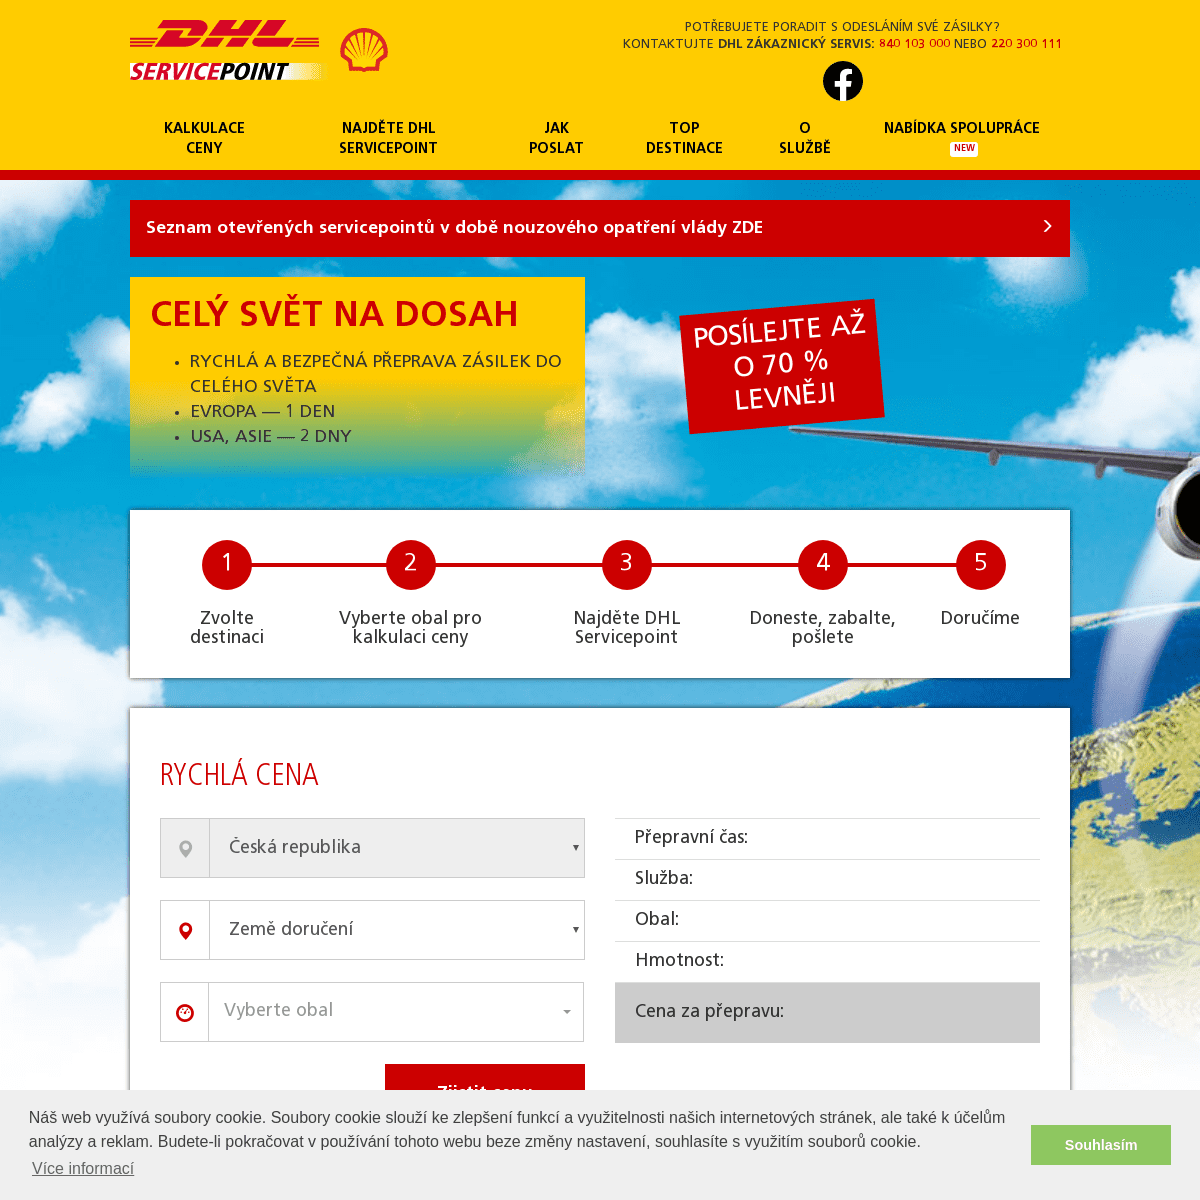 A complete backup of dhlservicepoint.cz